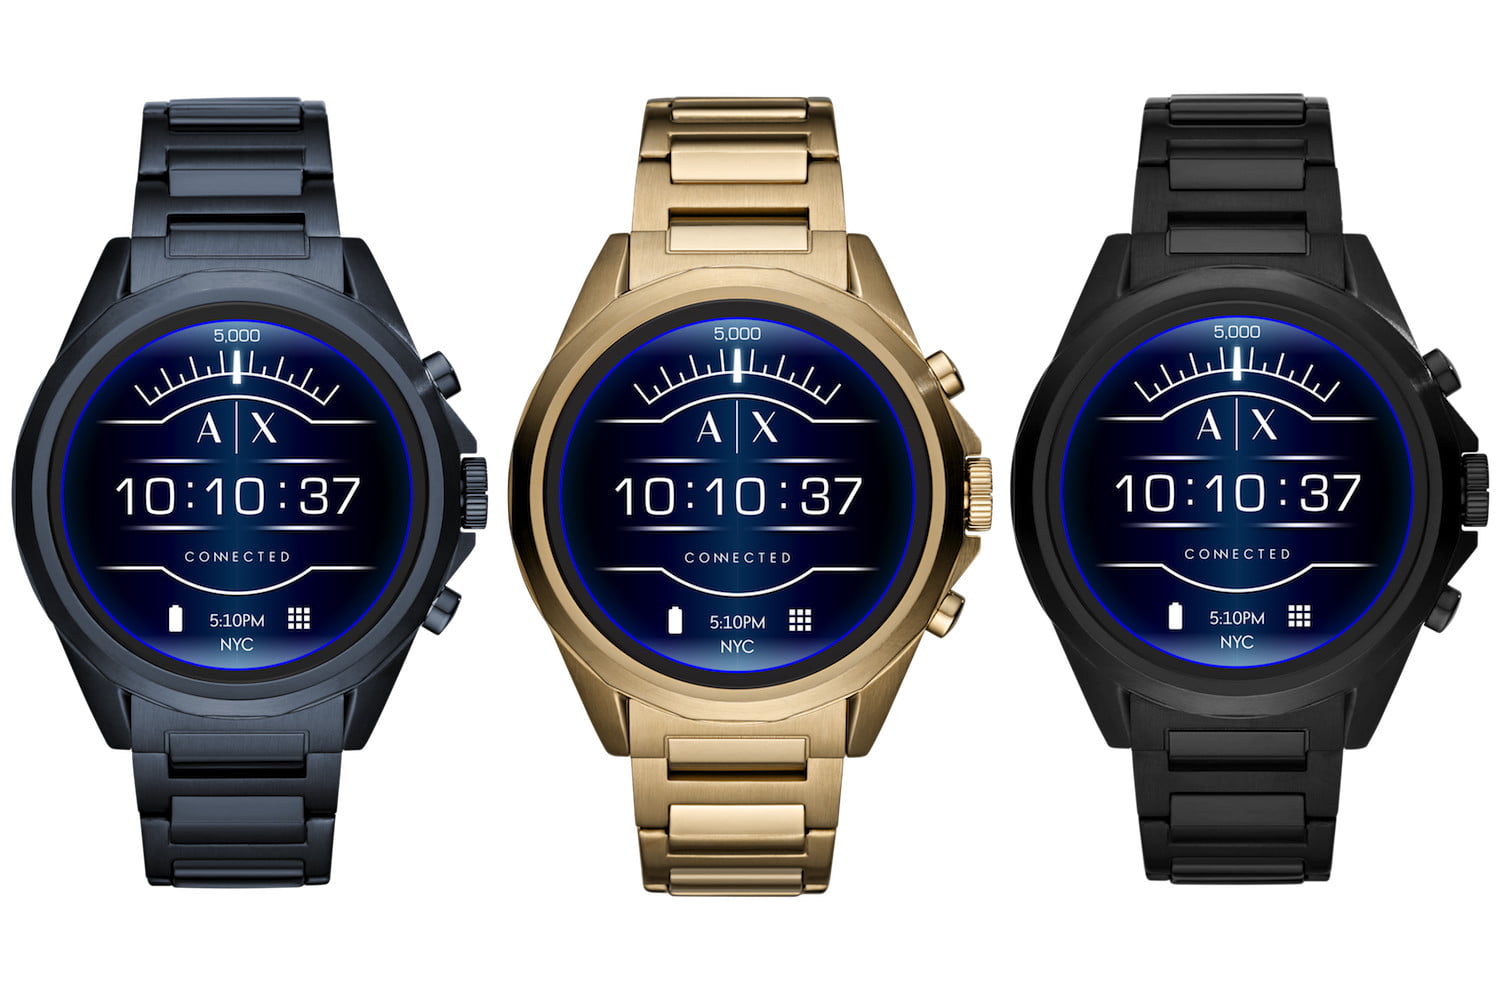 Luxury Smartwatch Without Hefty Price Tag? Meet the Armani Exchange ...